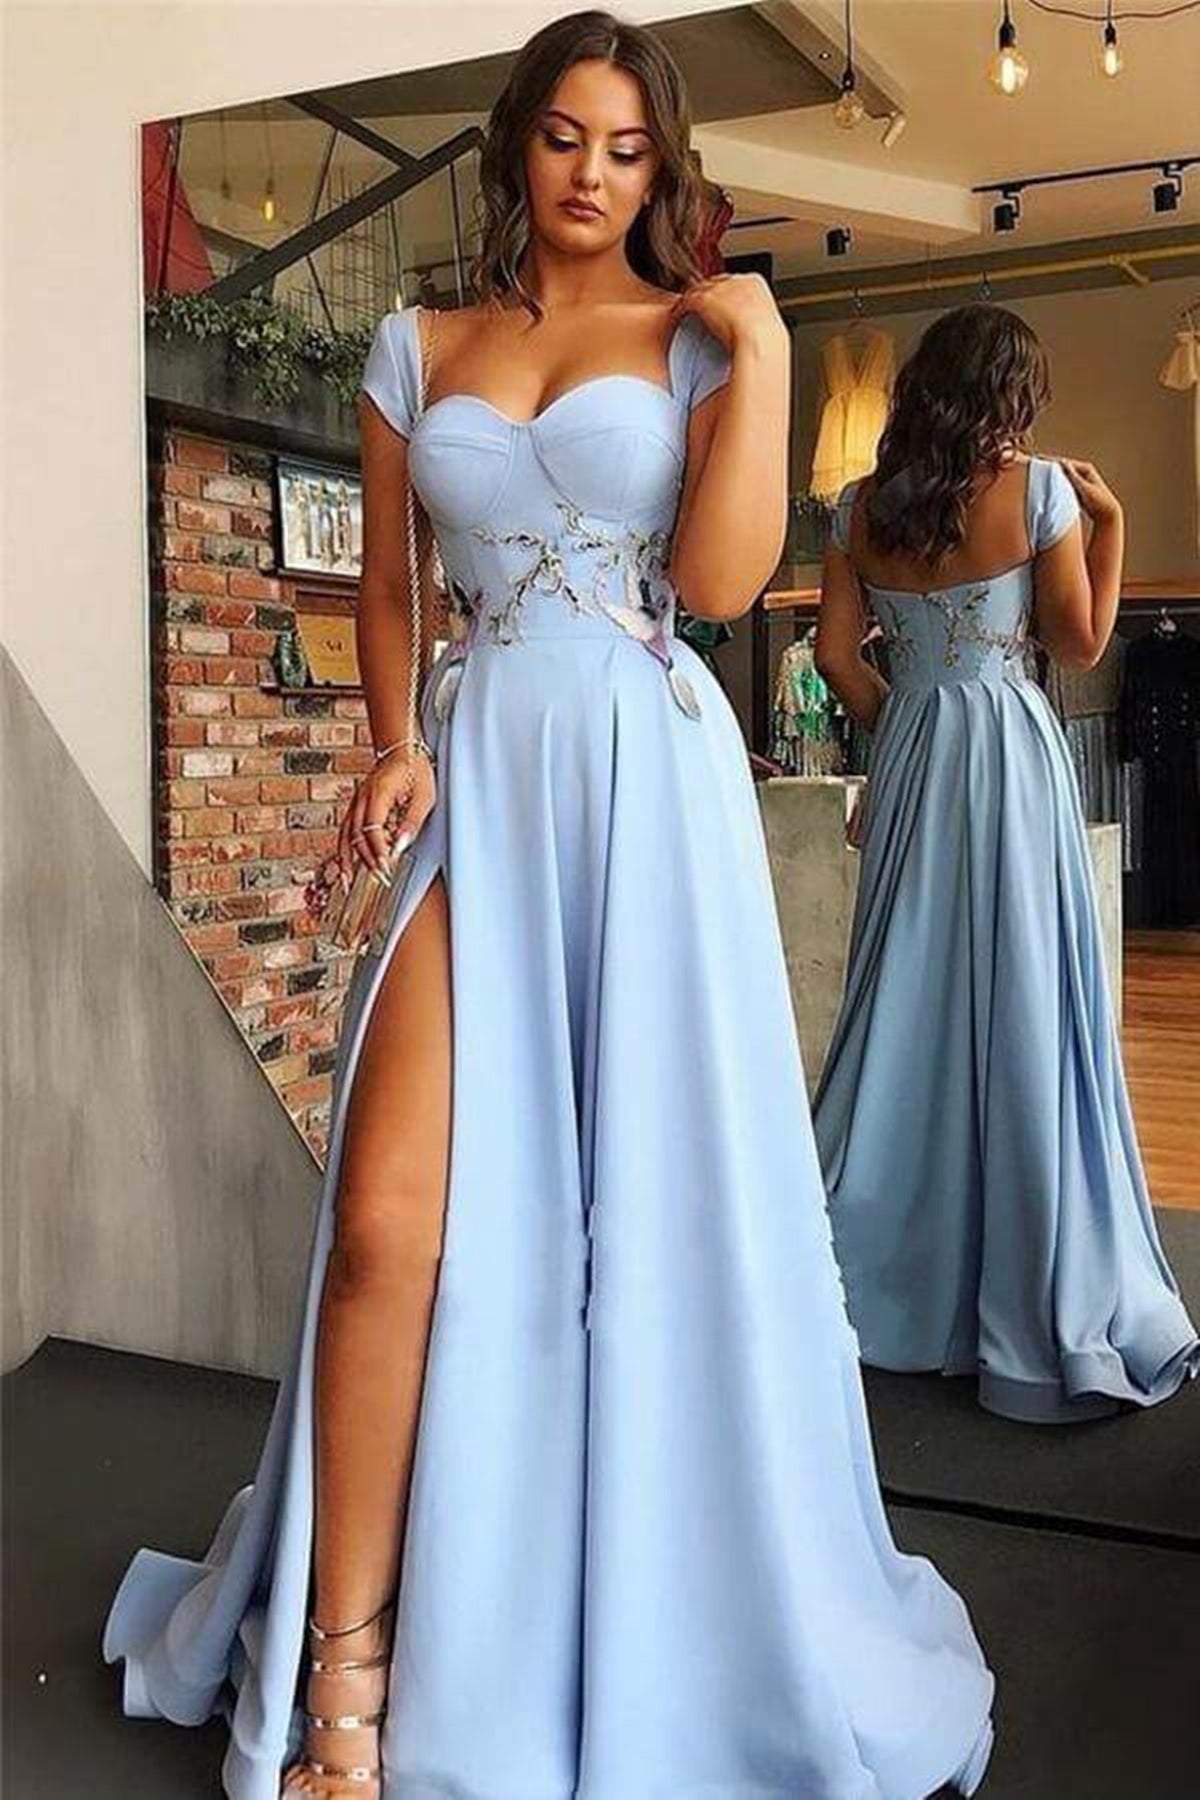 blue maxi dress with sleeves